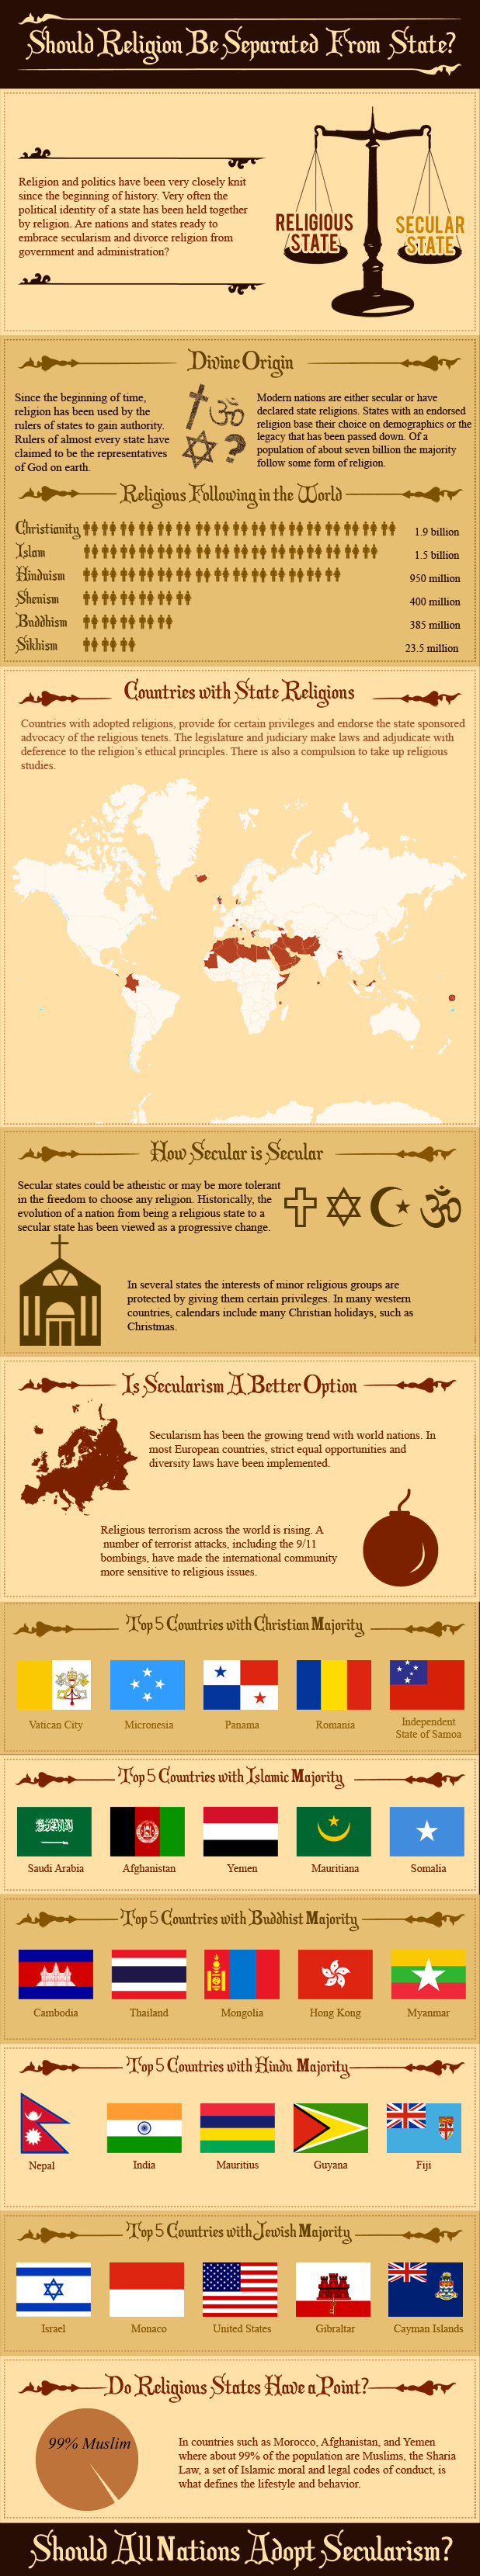 Should Religion Be Separated From State? Infographic